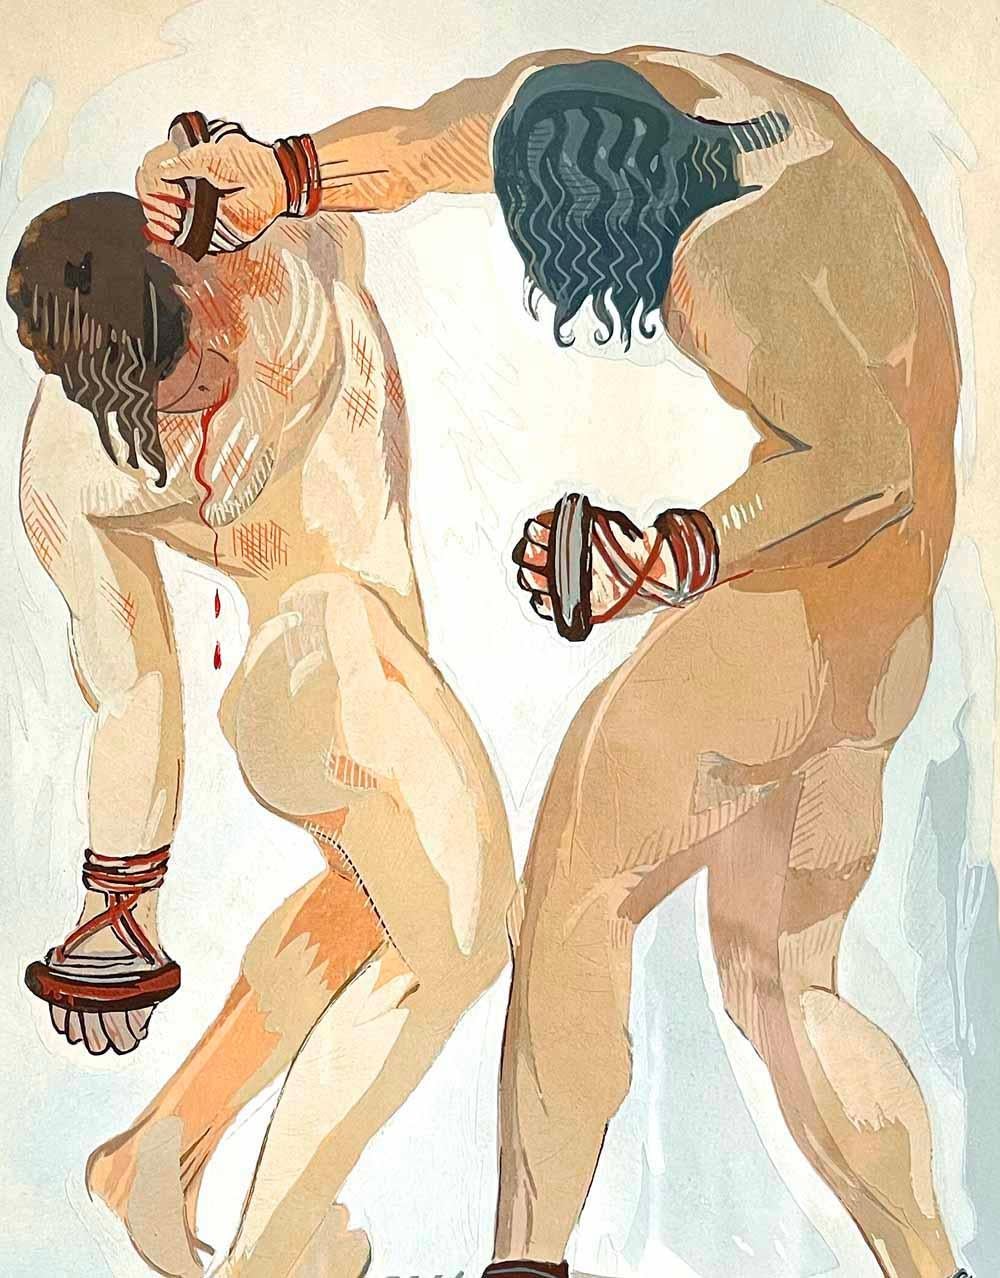 This superb depiction of two nude male boxers at the height of their fight, one knocking out the other, was painted by François-Louis Schmied, one of France's two leading artists specializing in high-end book design and illustration, along with